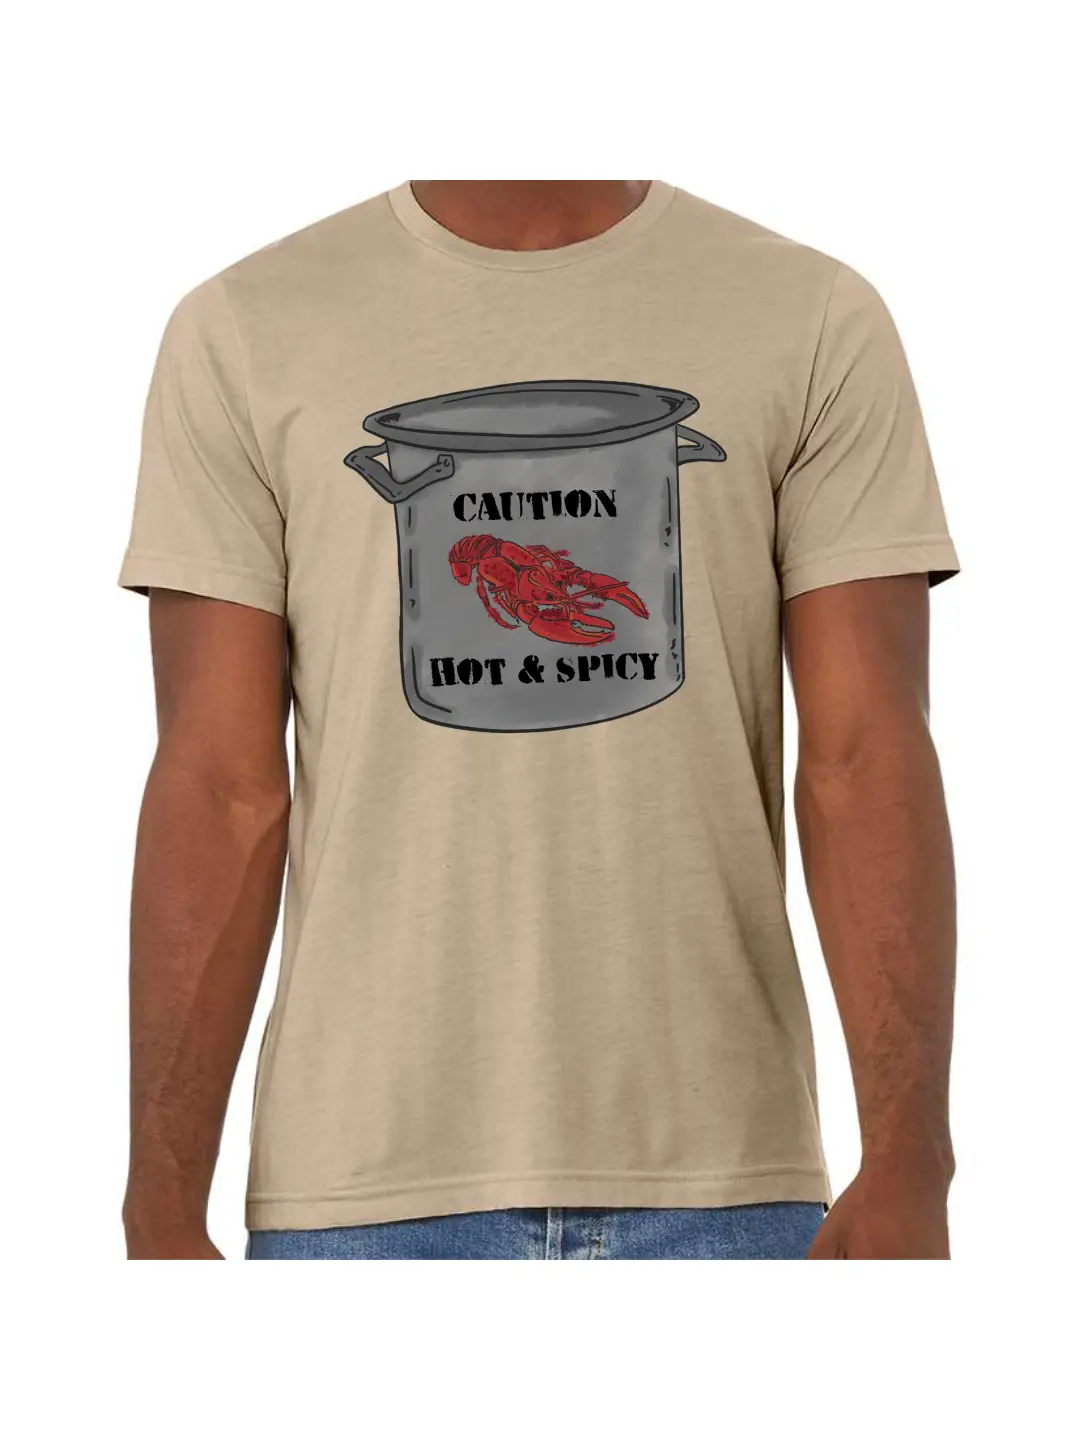 A Heather Tan T shirt with a graphic of a large stainless steel pot, on the pot at the top is the word Caution with a crawfish below and the words Hot & Spicy underneath